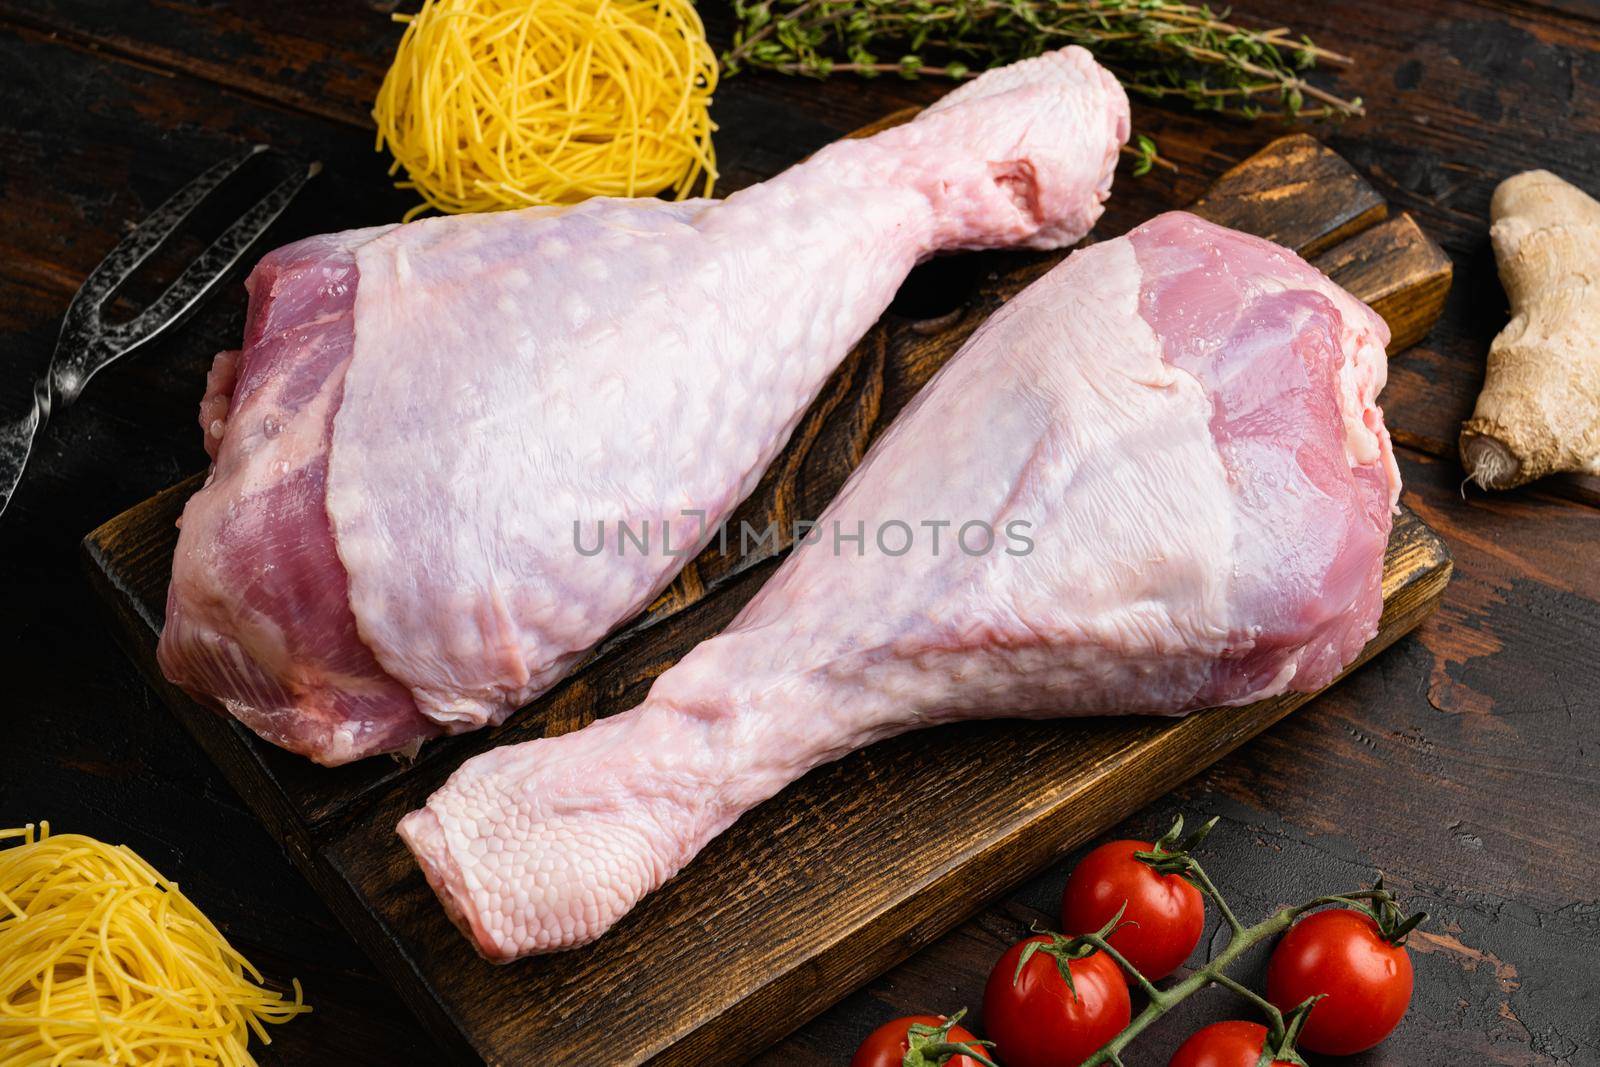 Fresh uncooked turkey legs, on wooden cutting board, on old dark wooden table background by Ilianesolenyi